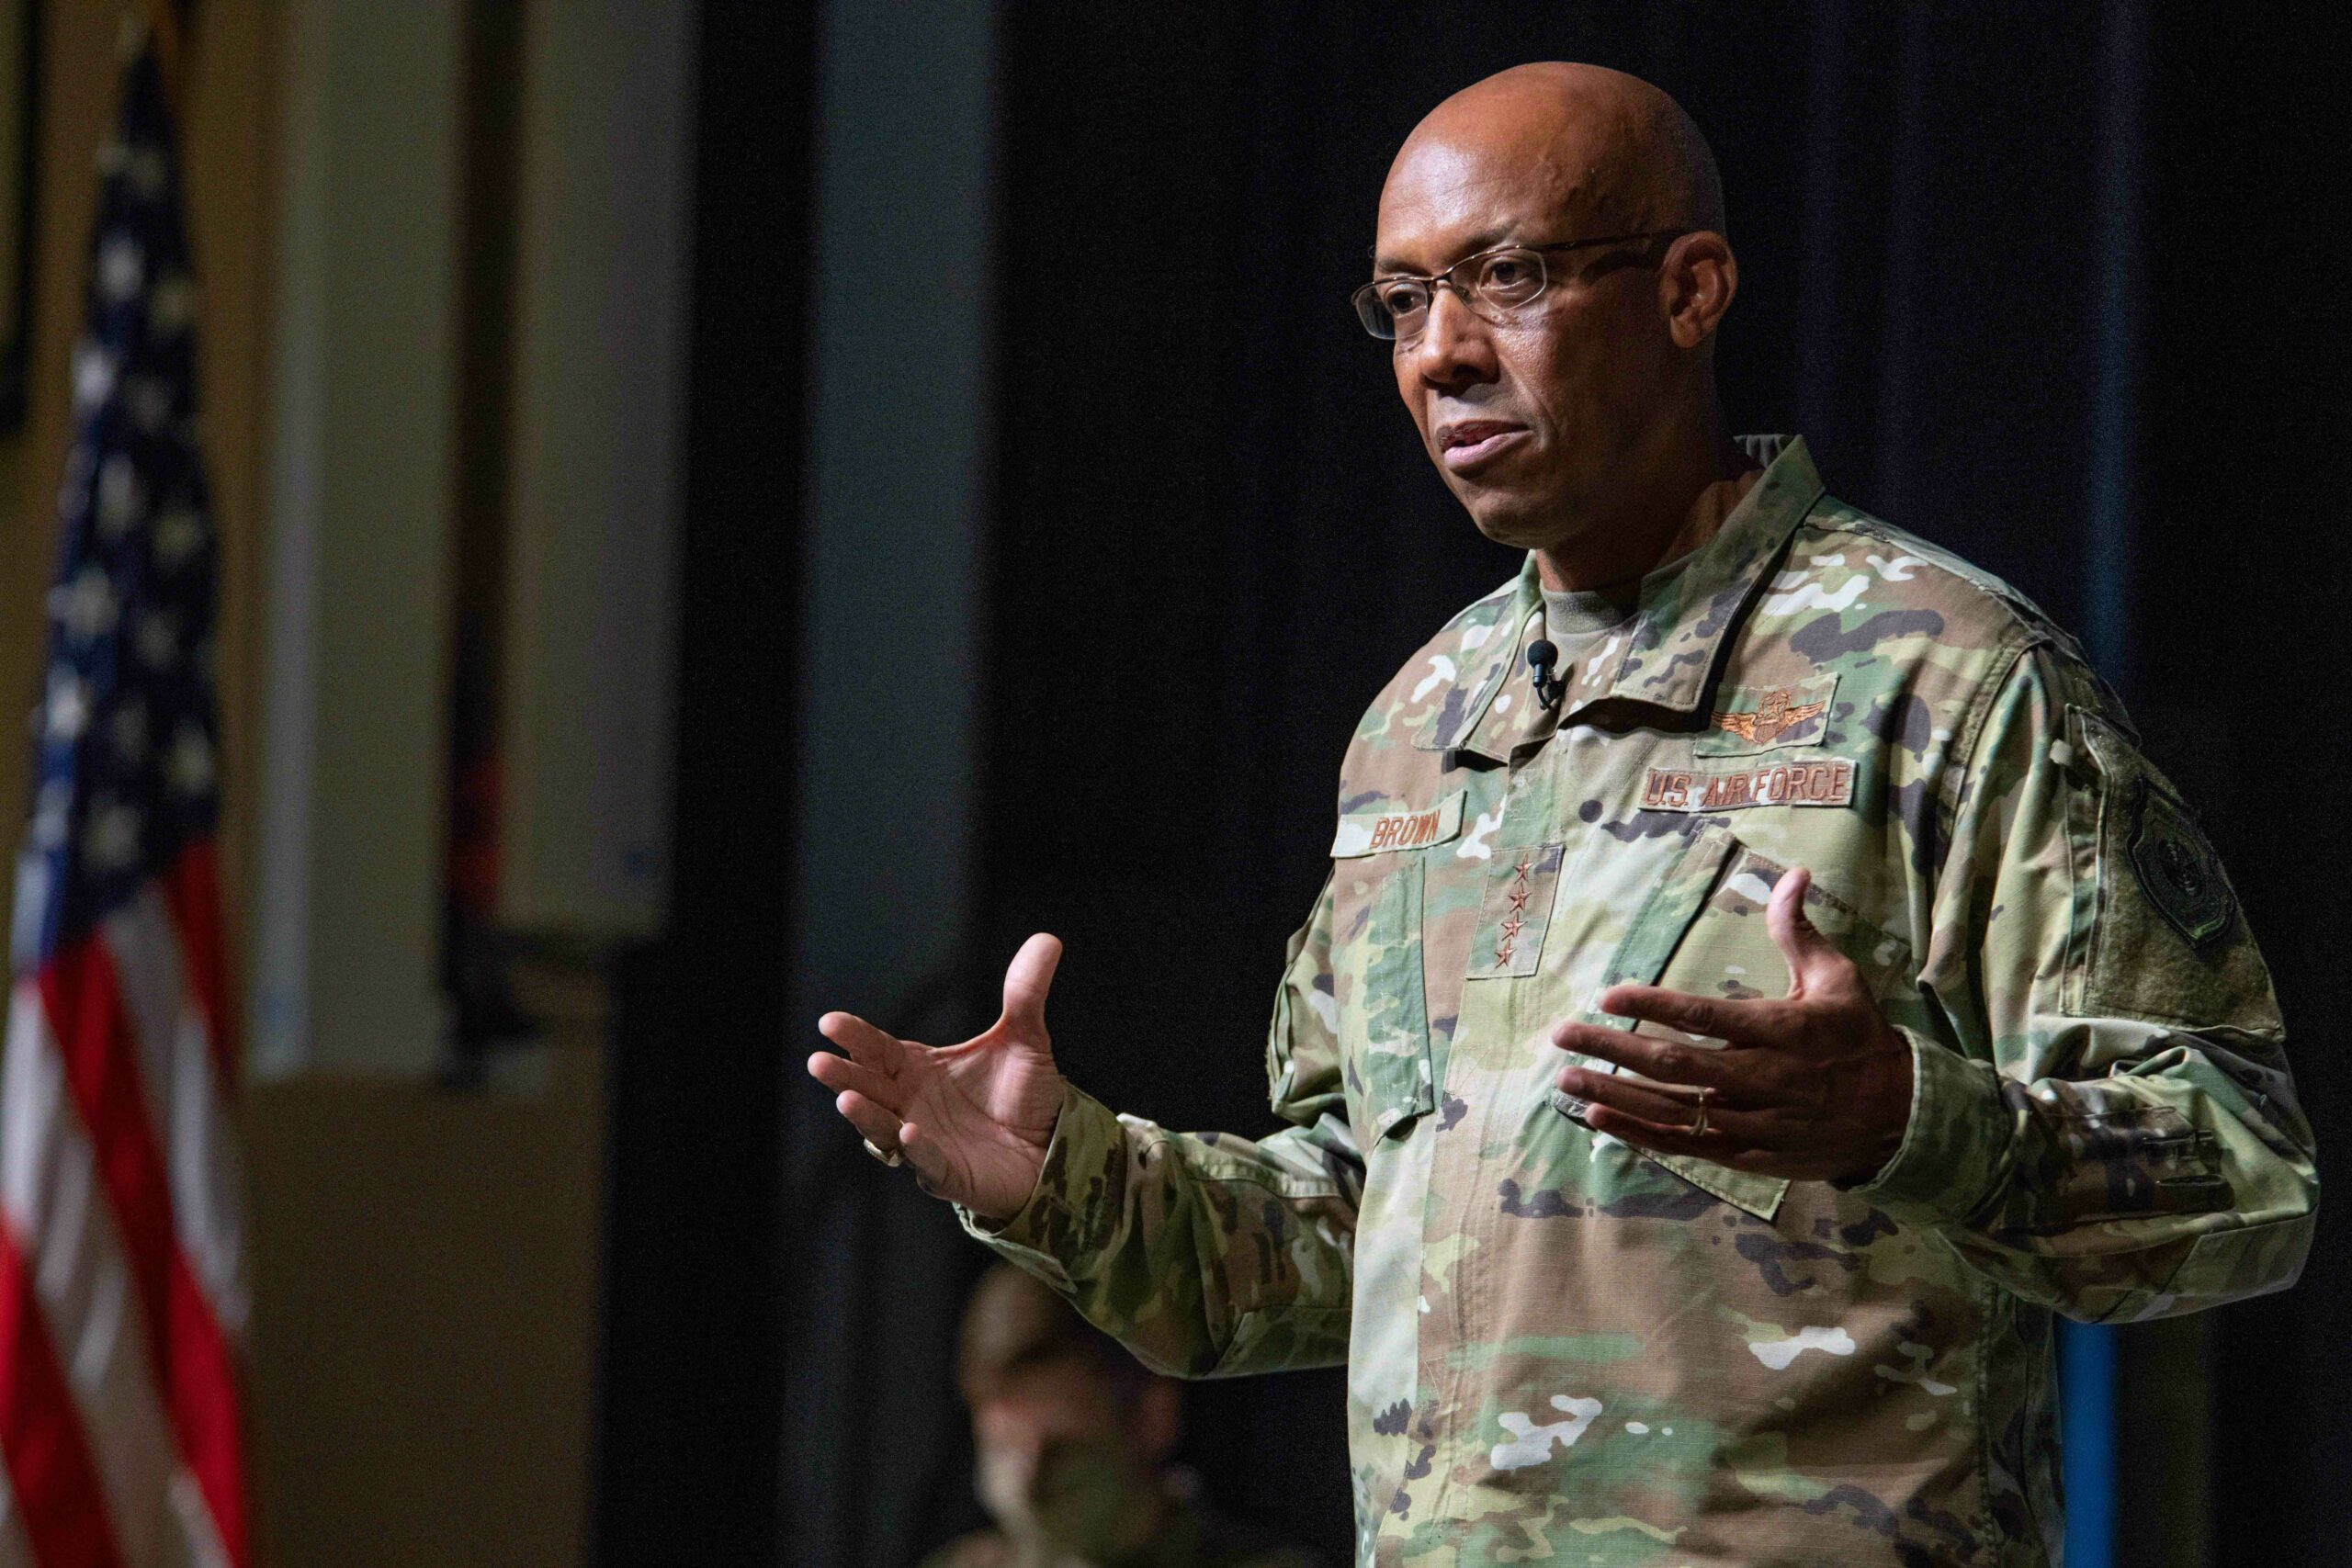 Air Force Chief of Staff Gen. Charles Q. Brown Jr. speaks with Air University senior military leaders and faculty, Aug. 26, 2020, Maxwell Air Force Base, Alabama, 2020.